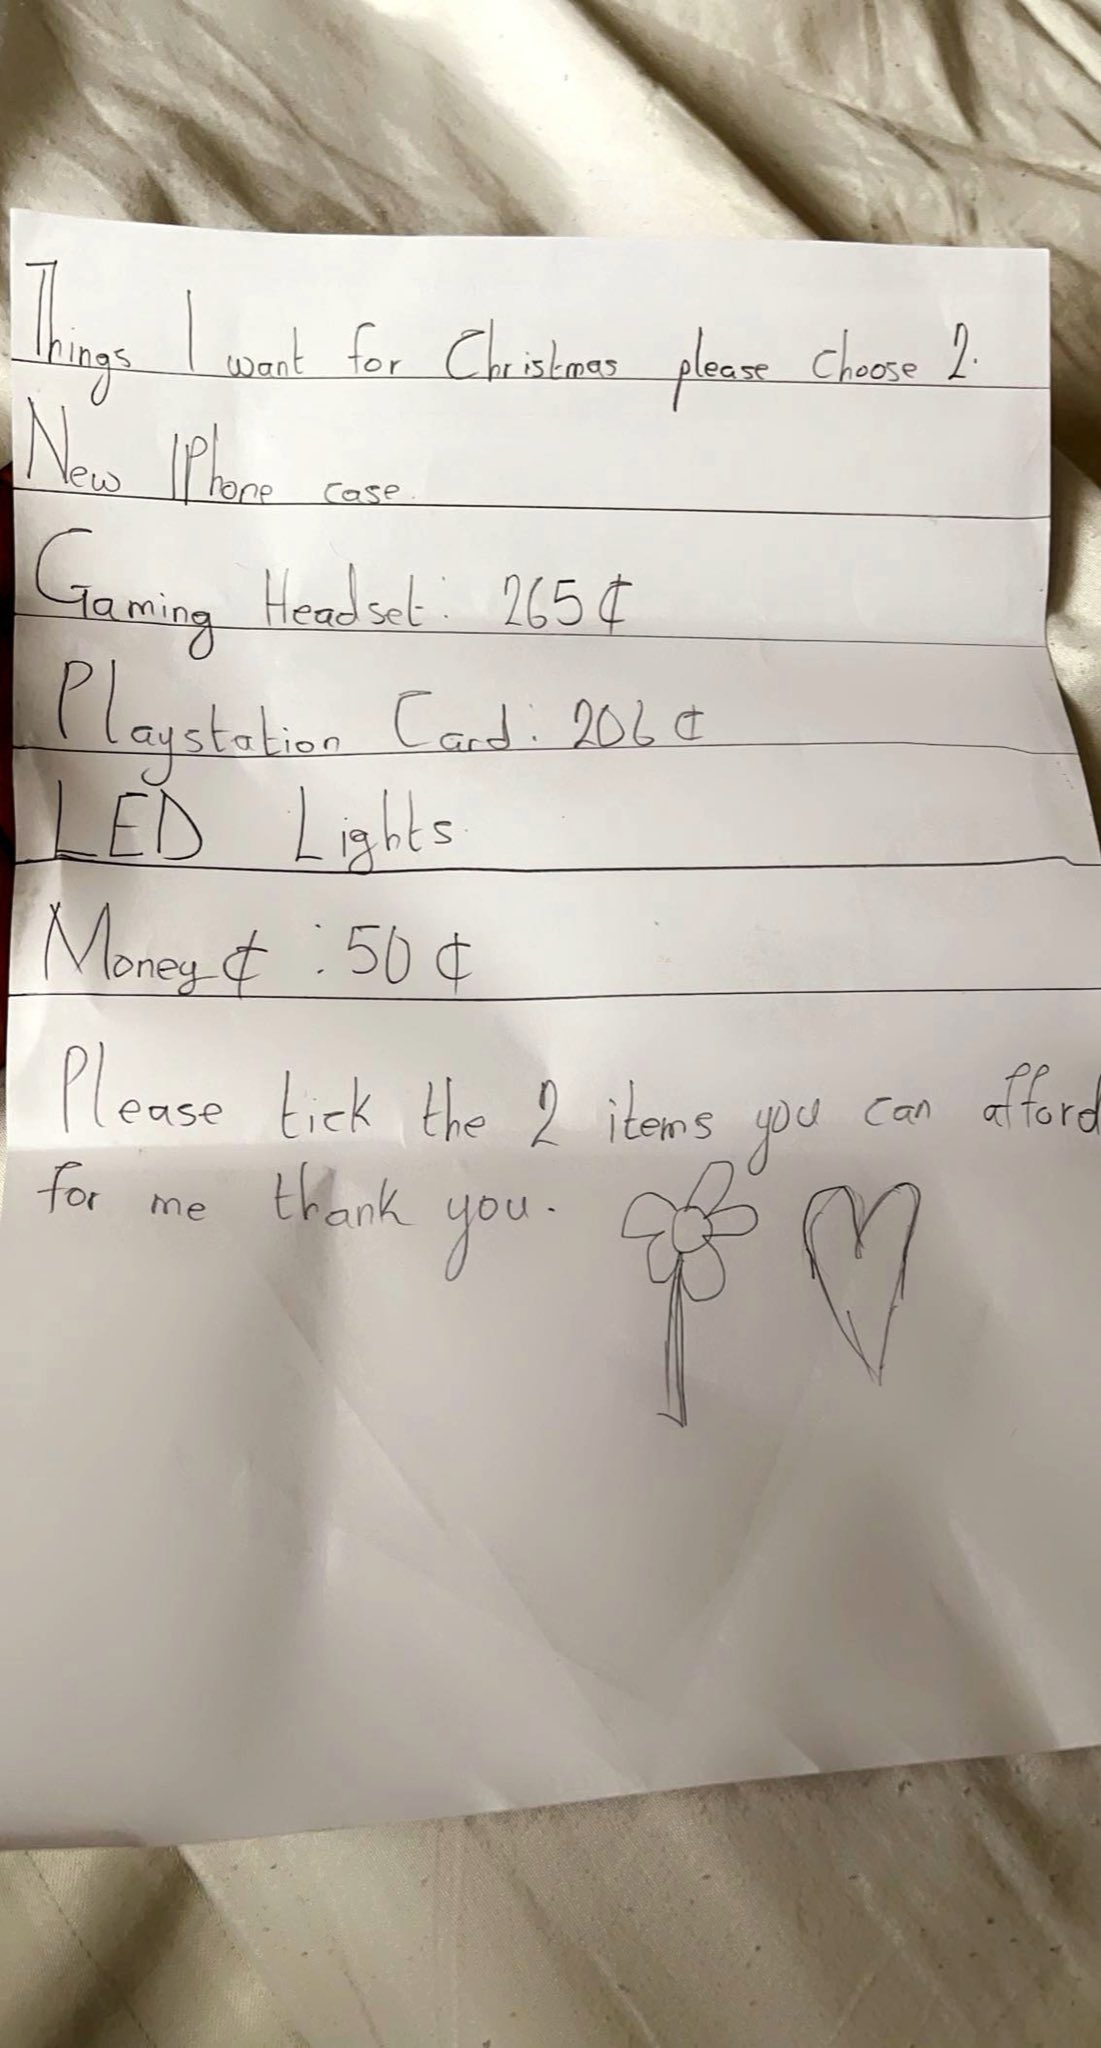 Oswald 2.0: Social Media Reacts To Young Boy's Christmas List